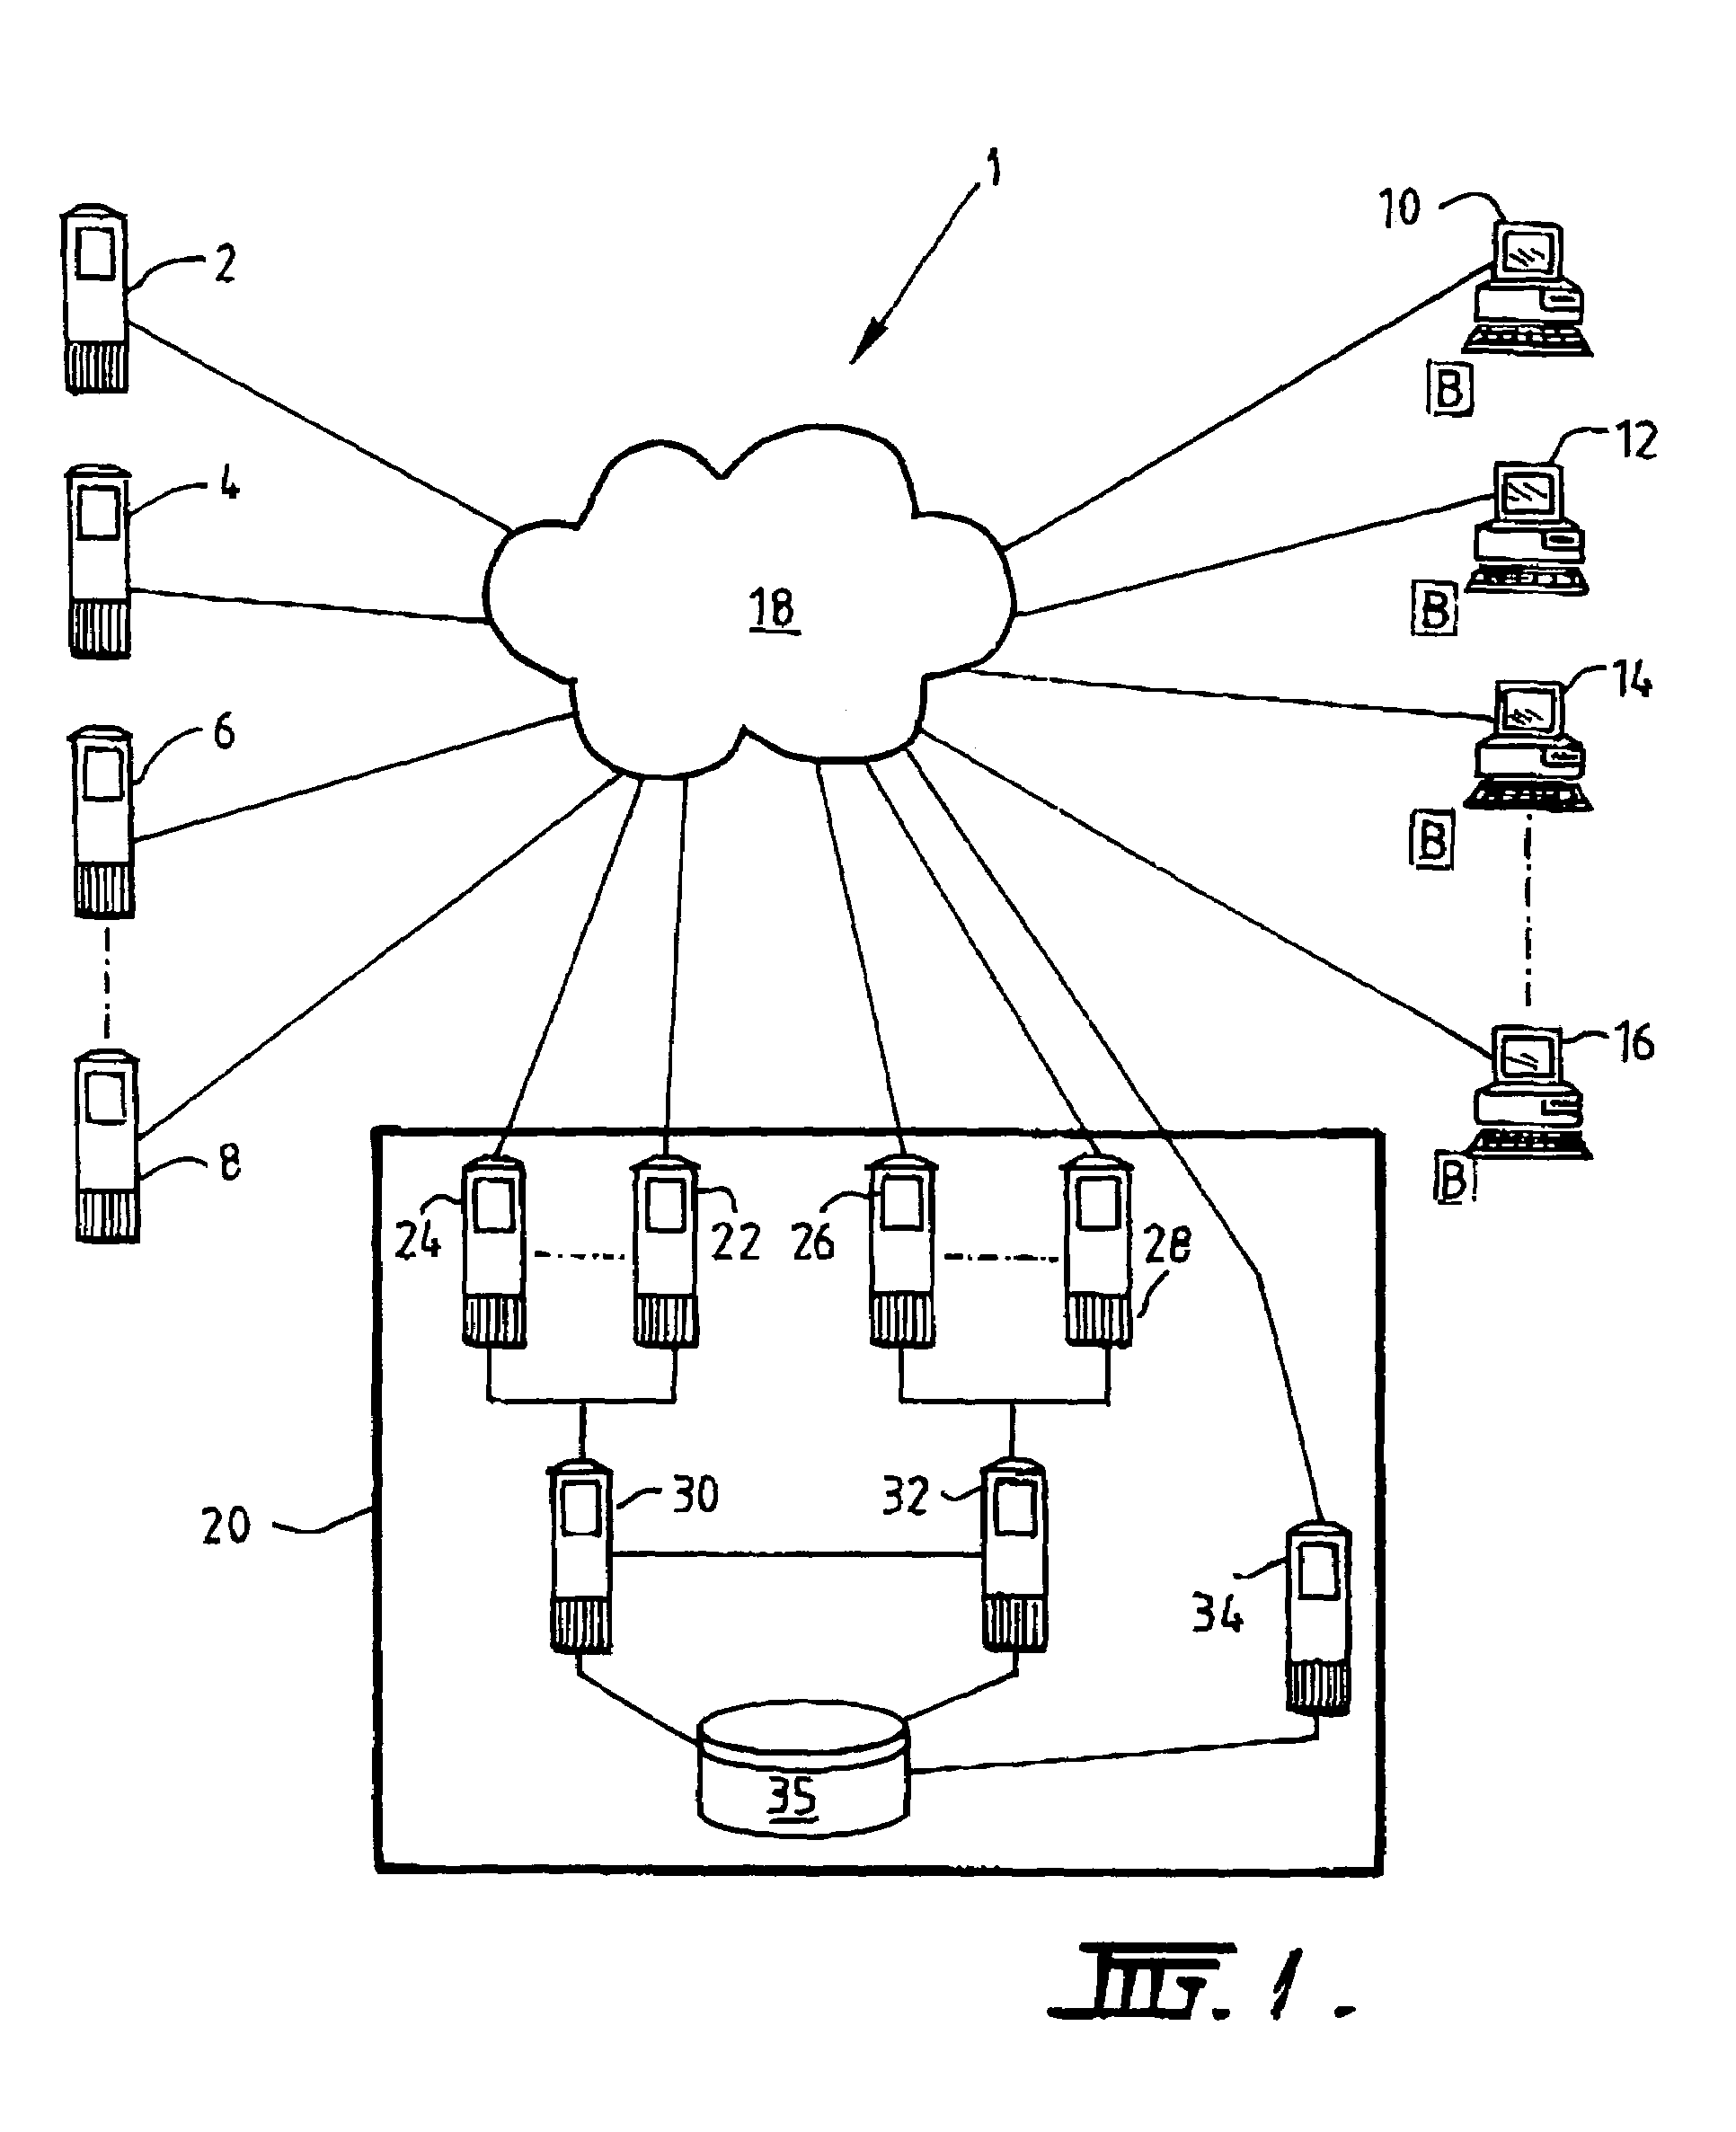 Network resource monitoring and measurement system and method